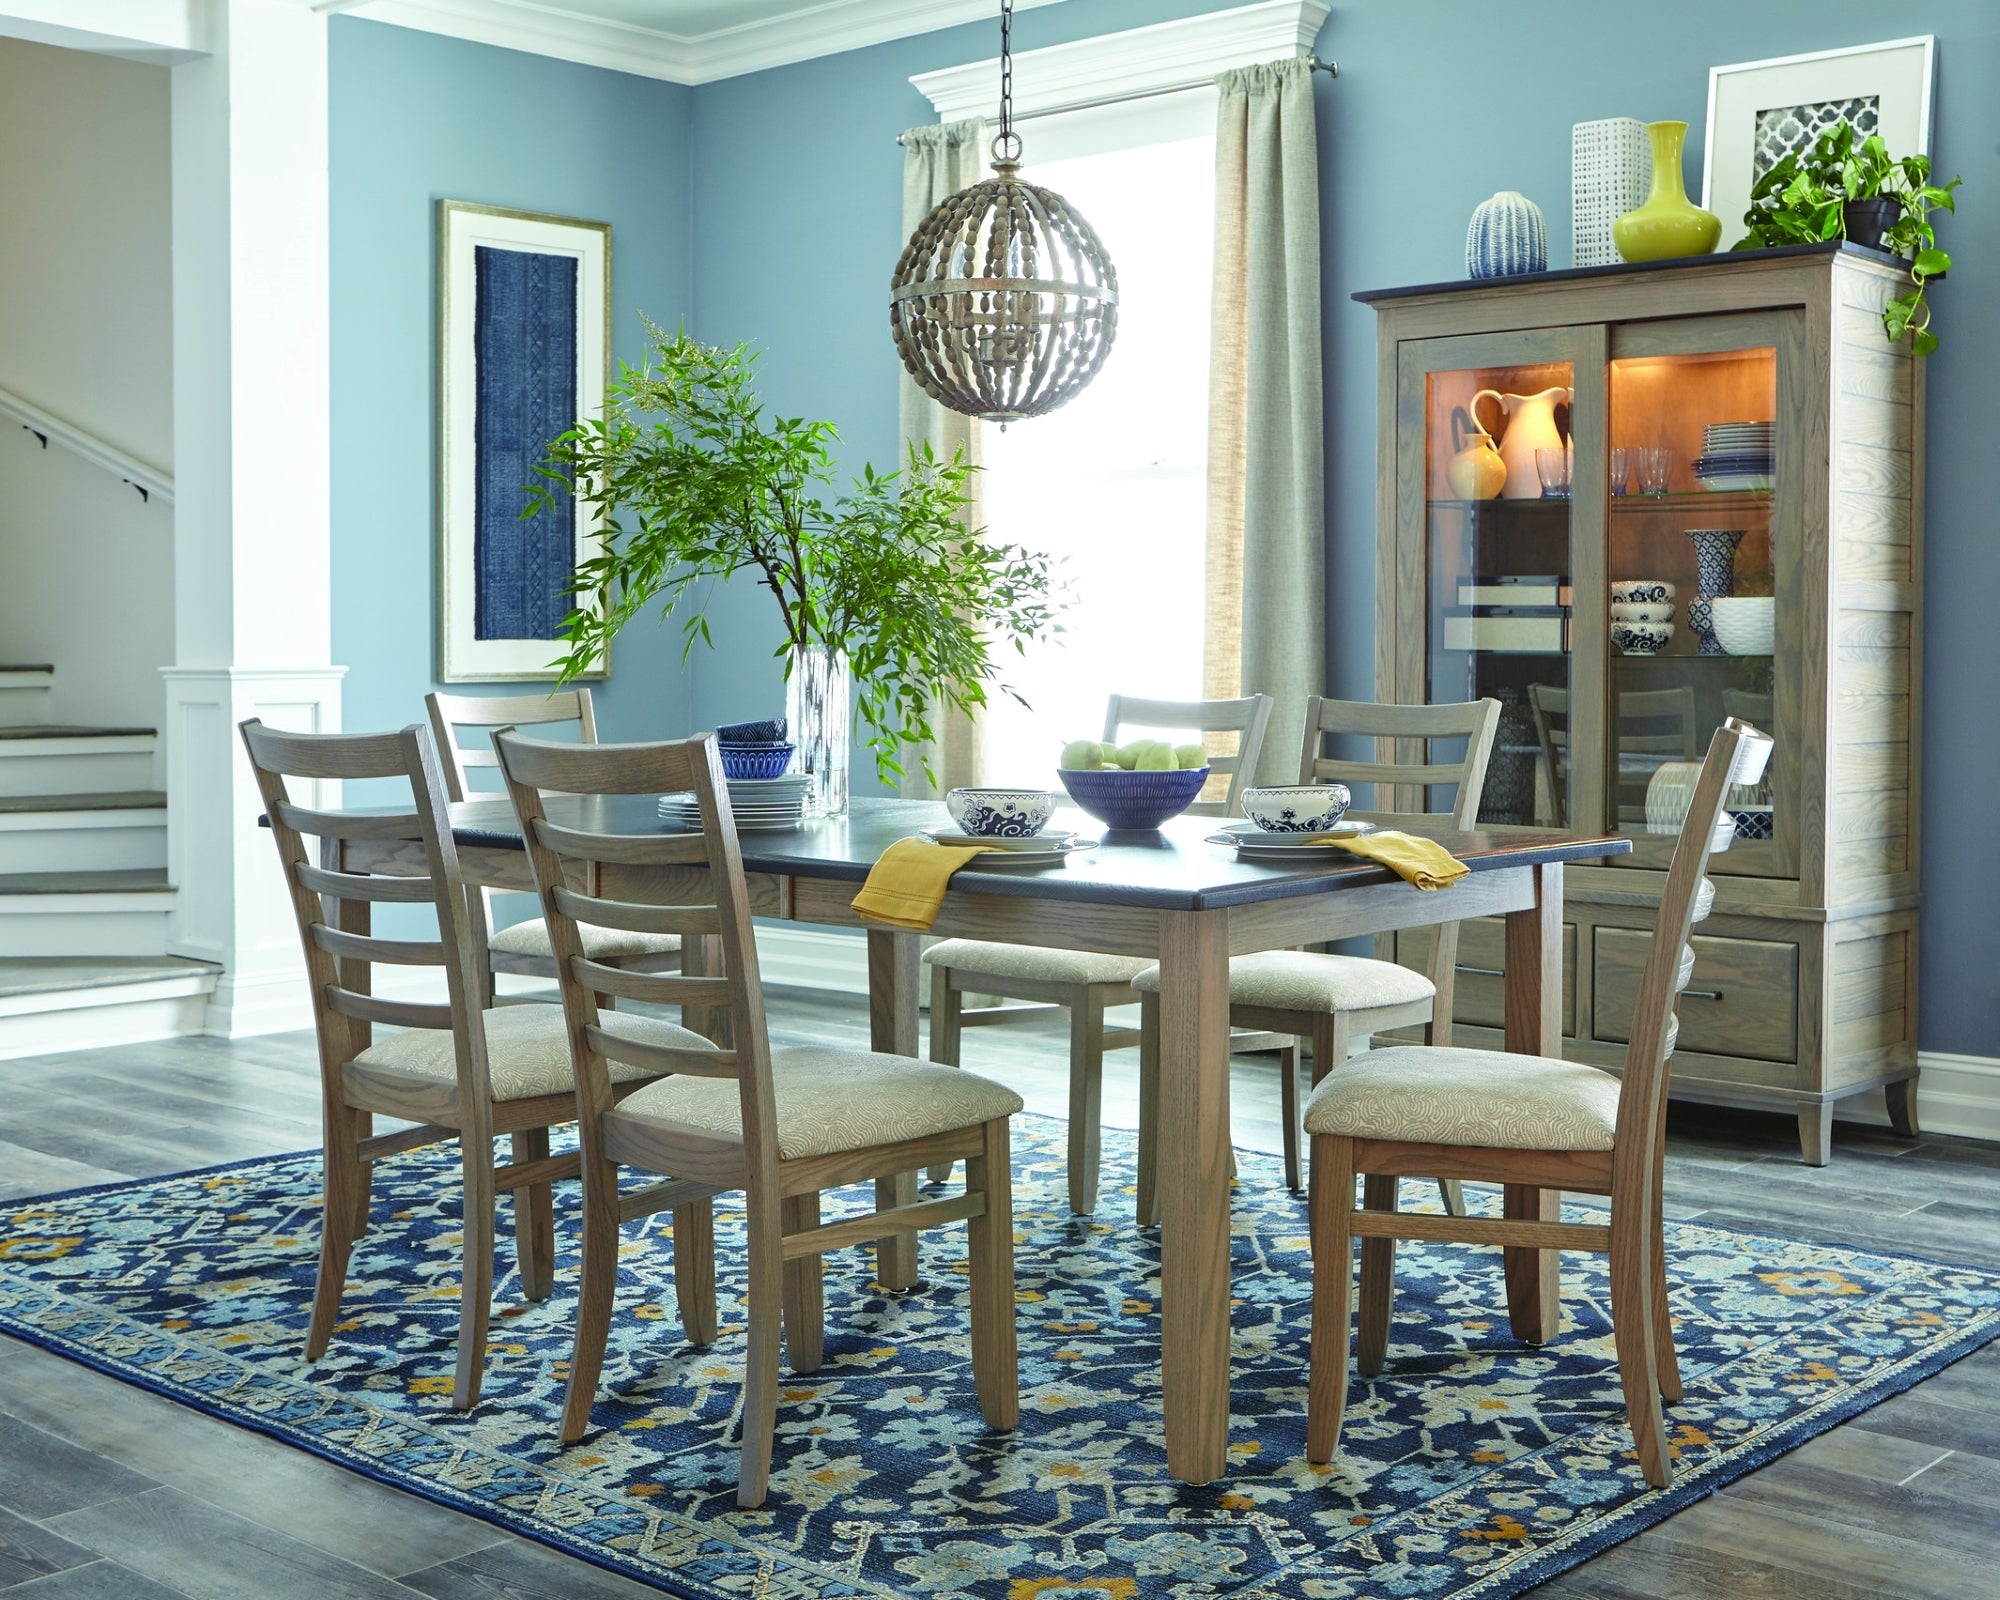 Two-tone wood dining rectangle dining table surrounded by six wood dining chairs with fabric seats.